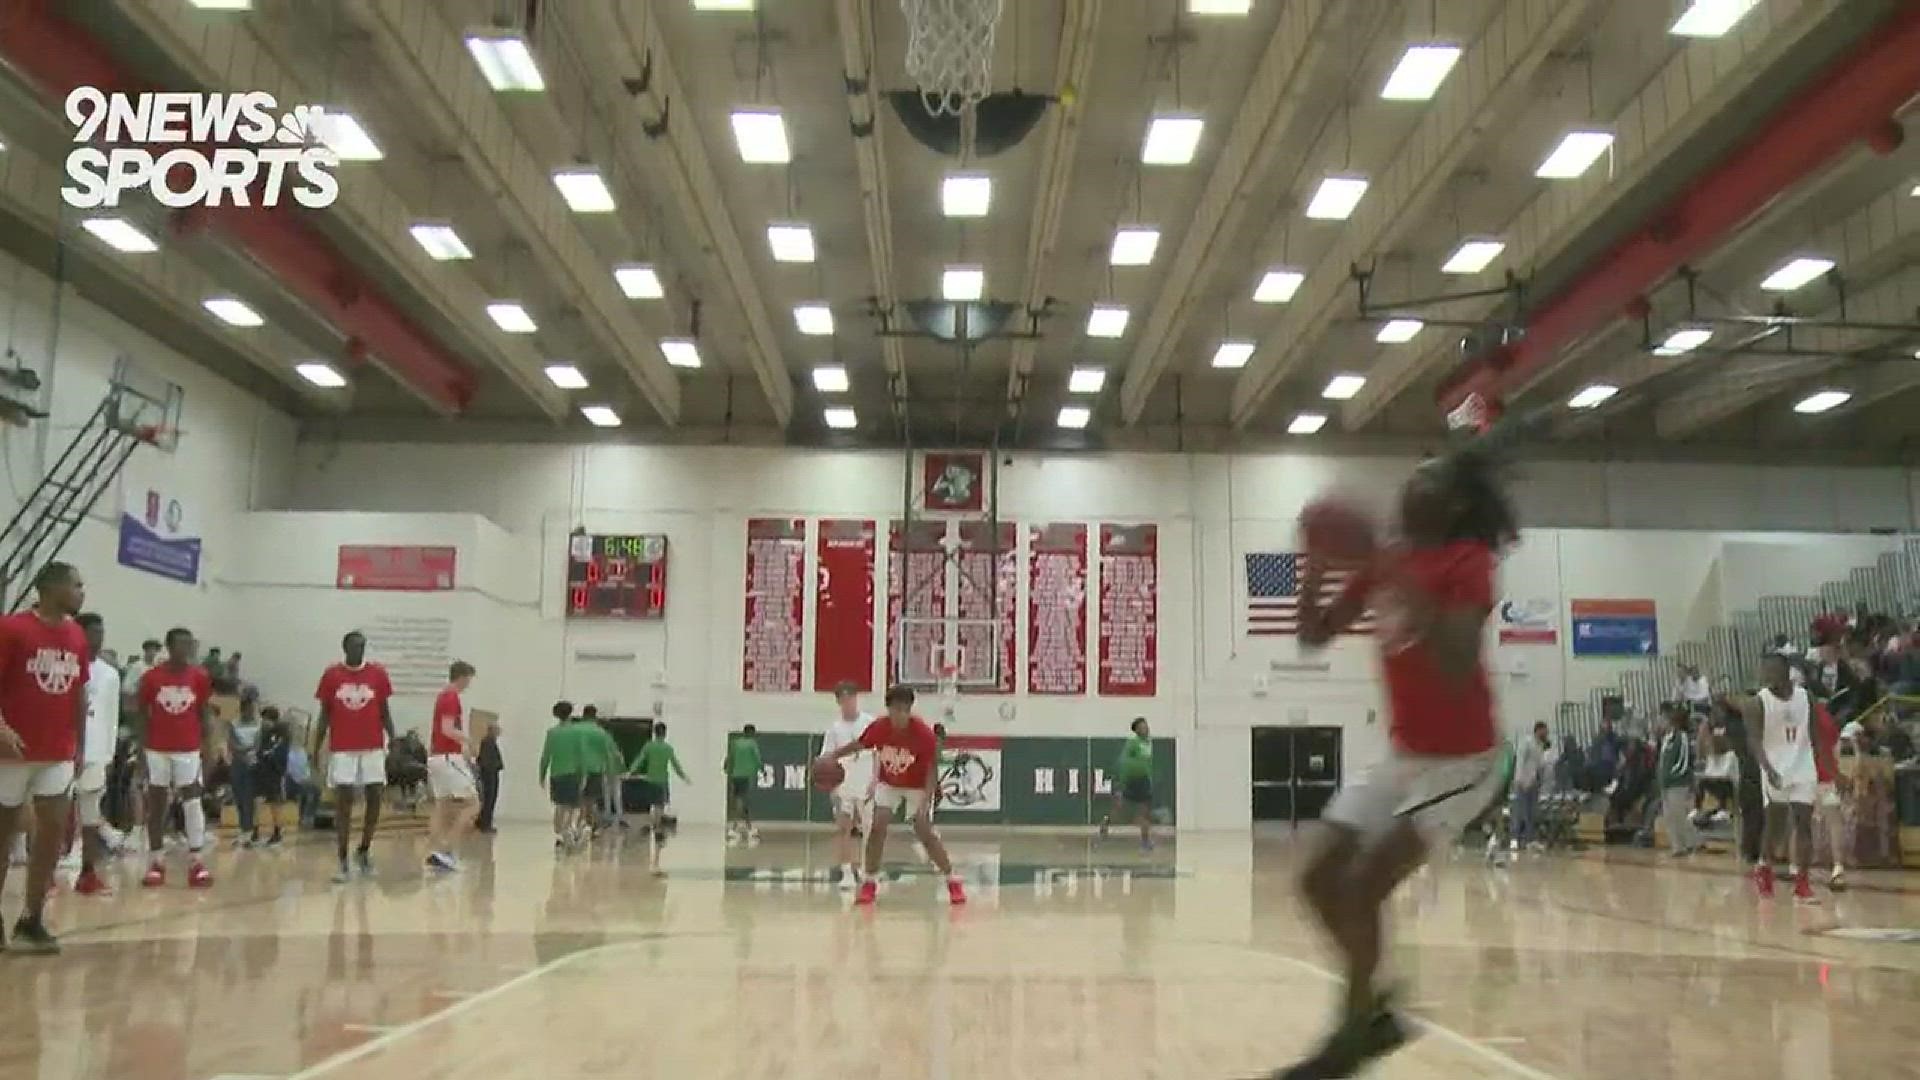 The Smoky Hill Buffaloes hit a last second buzzer-beater to defeat the Overland Trailblazers 71-70 at home.